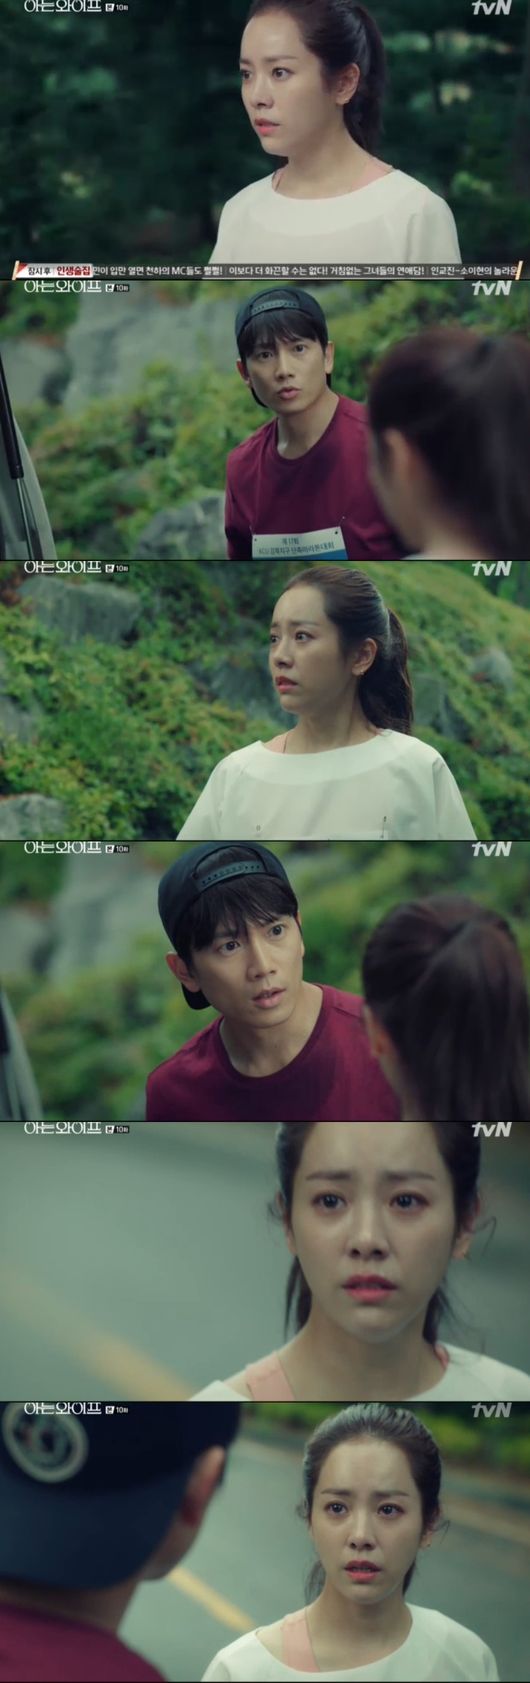 Han Ji-min kissed Ji Sung on surprise during Knowing Wife with ConfessionsIn TVNs drama Ai is a Wife (directed by Lee Sang-yeop, played by Yang Hee-seung), which was broadcast on the 30th, Woojin (Han Ji-min) told his heart to Ji Sung.HyeOne was disappointed when Joo Hyuk did not come to the appointment at the end, and then there was a big argument with Joo Hyuk who came home.Hye One said, You have changed, not you who were doing everything I said. Juhyuk was tired of saying, Do you have to pretend to die?Hye One left the house disappointed that she do not want to live with me in the appearance of Juhyuk, which she had never seen before.I asked Hyun-soo to take me anywhere, and I enjoyed the drive together and spent the night. On the next day, Hye One turned all the marriage photos with Ju-hyuk.It was as if he had expressed the closed mind of HyeOne.HyeOne sent Juhyuk a consultation request and Juhyuks luggage to Delivery, and Juhyuk called HyeOne, saying, Do you have to do this?Hye One said, I do not do this because I want to do this. I need someone who is not what I want and I can not live as you want, and I need someone who is more than anyone else.Joo Hyuk said it was all his fault.The news of Juhyeoks divorce was also told to the end and Woojin. Juhyuk was confused, saying, I do not know.I am in favor of Divorce, he said, and the two of them are not so good. After the end, he advised, Do what Juhyuk wants.Woojin kept his words, and looked at Juhyuk.He remembered Hye One saying, You have changed, you are not the same as you used to be, and then he called HyeOne again.But he didnt receive it. He looked at the end of his happy relationship with Woojin, just next to him.While working, he received a call from HyeOne, who was introduced to a business partner who had not been introduced to him during the publication ceremony.Ju-hyuk informed the manager of the report, and the manager thanked him for filling the quarterly performance in a single room, but Ju-hyeok was anxious. Woojin looked at Ju-hyeok and cared.Woojin went to Juhyeok and asked if he was having a problem with HyeOne. Juhyuk said, I do not care, I blame myself.Hye One urged Ju-hyuk not to take time. Ju-hyuk asked him to think about it once more.HyeOne dragged out a divorce by saying, I dont want to consume my feelings.After finishing his date with the end, Woojin accidentally witnessed Hye One and a young man (Hyunsu). Then he heard that Joo Hyuk and Hye One went to the law One, and went to the house with Ju Hyuk.Woojin was concerned about Joo Hyuk, who tried to eat Alone cup noodles, and on behalf of Woojin, the end prepared food, and there was an awkward feeling between Woojin and Joo Hyuk.The company held the Marathon competition; following Woojin, Joo Hyuk and Jonghu also arrived.When Woojin heard that he had fallen into a cardiac arrest among the Marathon participants, he worried that he might be Ju-hyeok.I thought the person in the ambulance was Juhyuk, but fortunately it was not Juhyuk. At this time, Juhyuk appeared in front of Woojin, and Juhyuk asked, What is it, do you know?Woojin wept with relief, and felt more confused in his mind.After Marathon, he had a dinner party. Woojin calmed him down with a drink. Joo-hyuk looked at Woojin.While Joo Hyuk was out to answer the phone, he saw Woojin, who was drunk, blowing outside. They decided to break alcohol at the playground separately.At this time, Woojin fell down: Joo Hyuk asked, Woojin! You okay?Woojin said, Its not okay, its not okay. I know its not okay or not, but I did not do it from the beginning. I was like I was broken, I wanted to go blind, I wanted to be swollen, I was comfortable and dependent.I just do not know everything, conscience, guilt, and I just do not know one thing, I like the deputy a lot, he said with tears.Joo Hyuk refused to say, No, no, we can not, and Woojin pulled such a ju-hyuk and kissed him.Capture the broadcast screen of Knowing Wife